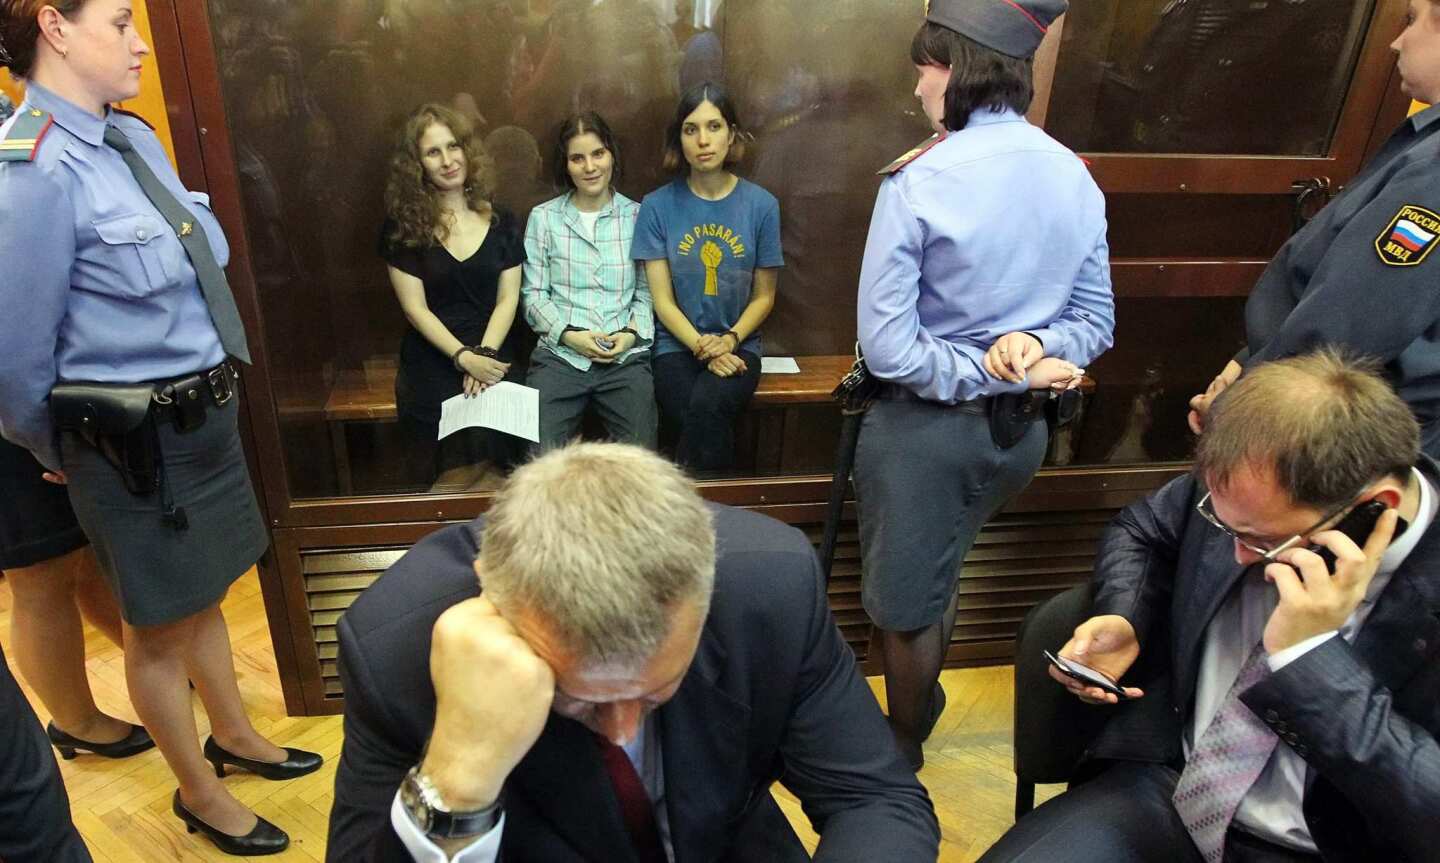 Russian feminist punk-rock band Pussy Riot members Maria Alyokhina, left, Yekaterina Samutsevich and Nadezhda Tolokonnikova sit in a glass-walled cage in a courtroom after the judge delivered the verdict at the Khamovnichesky Court in Moscow. Judge Marina Syrova sentenced the trio, who were found guilty of hooliganism motivated by religious hatred or hostility after singing a song insulting Vladimir Putin in the Christ the Savior Cathedral in Moscow earlier this year ahead of presidential elections in Russia, to two years in prison.